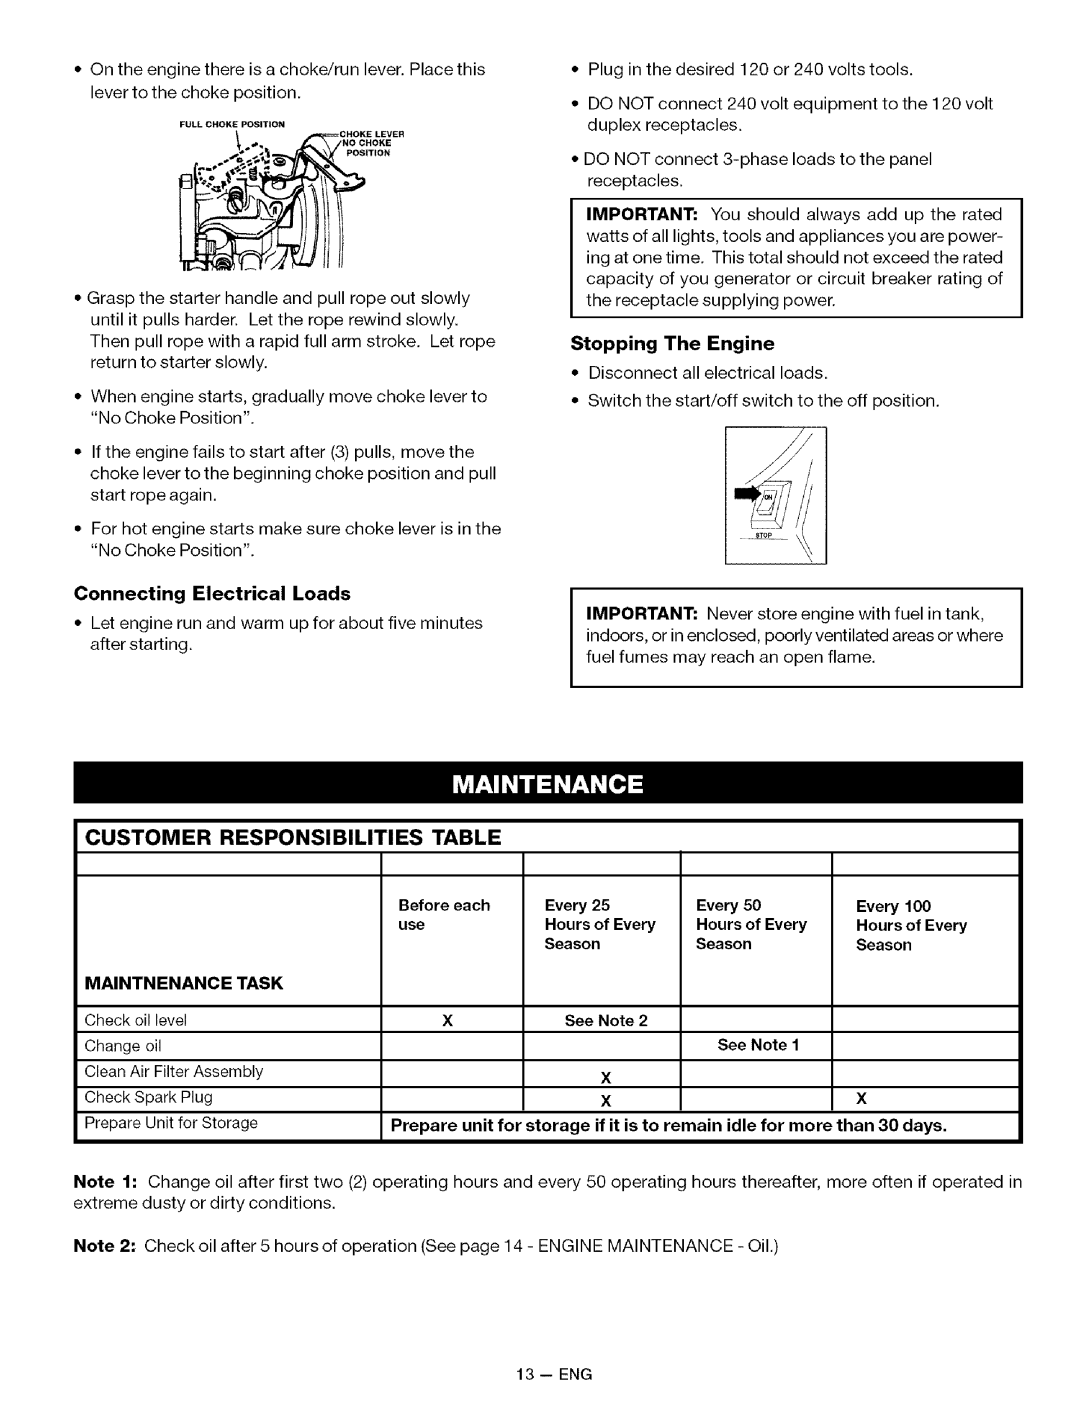 Sears 919.32721 Customer, Responsibilities, Table, Connecting Electrical Loads, Stopping The Engine, Maintnenance, Task 